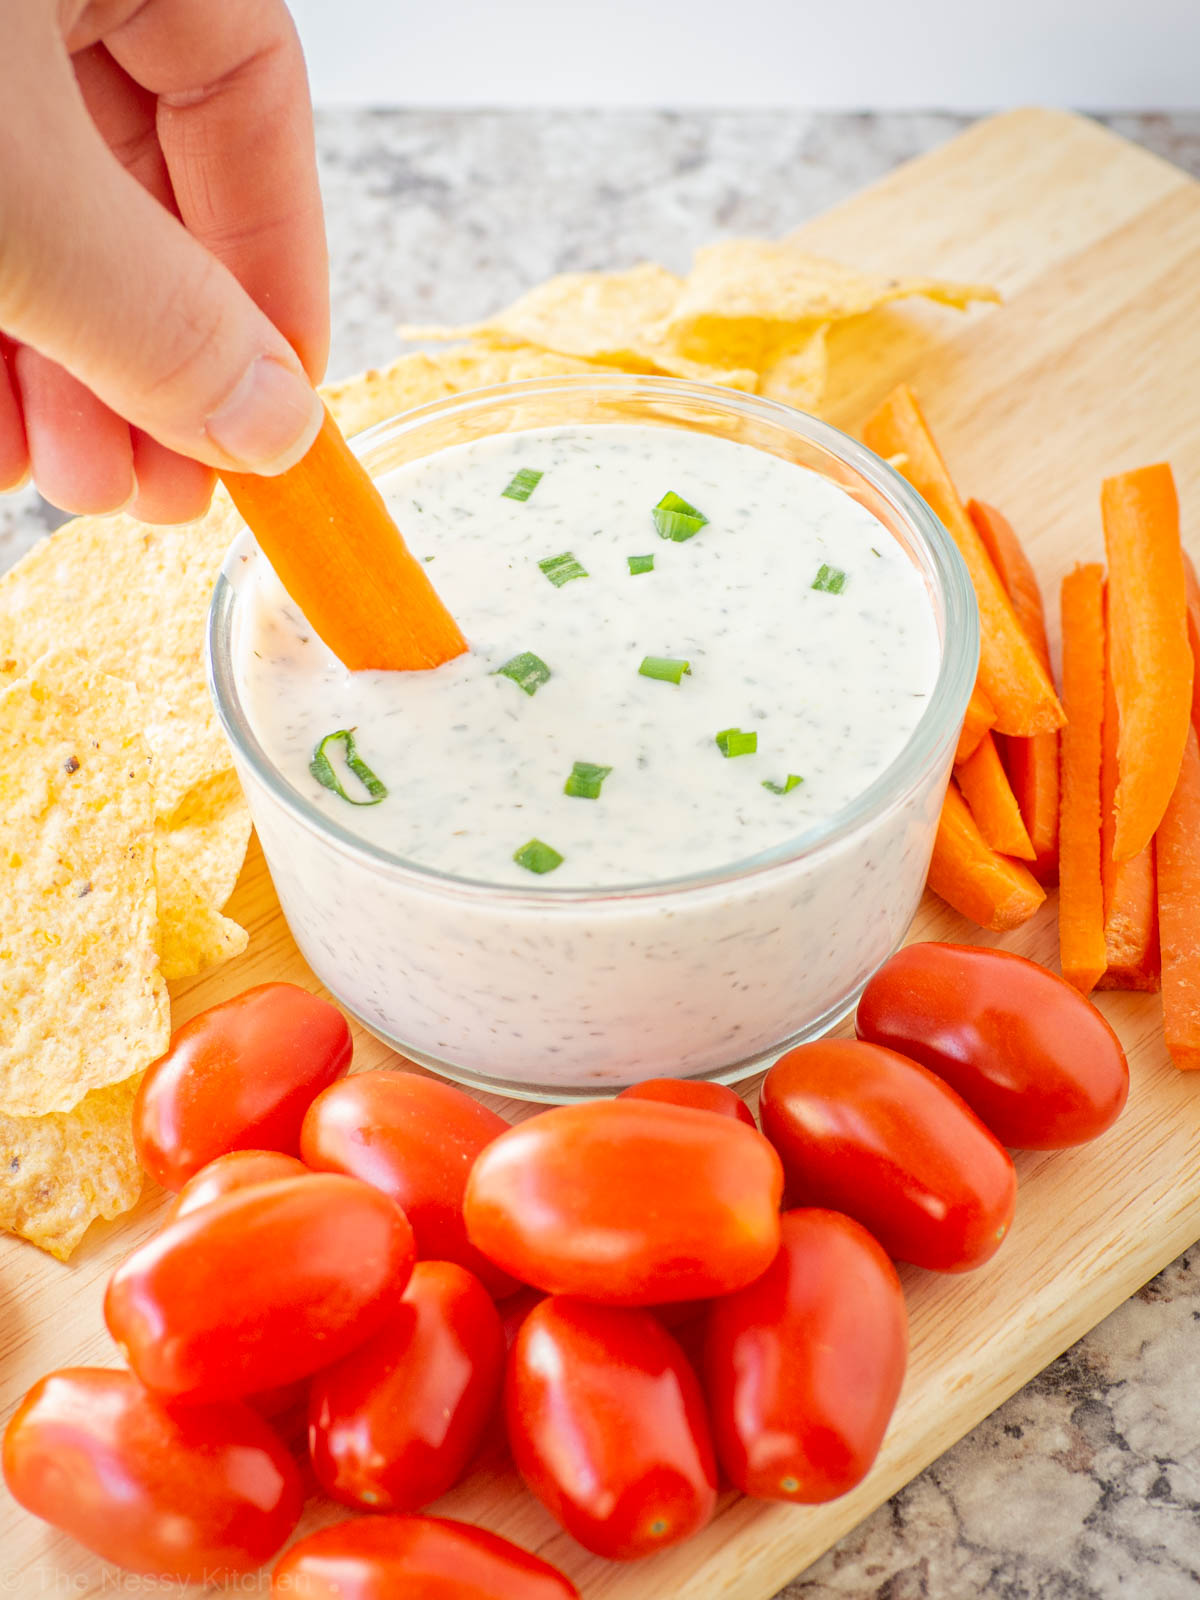 Hand dipping a carrot into a bowl of ranch dip.